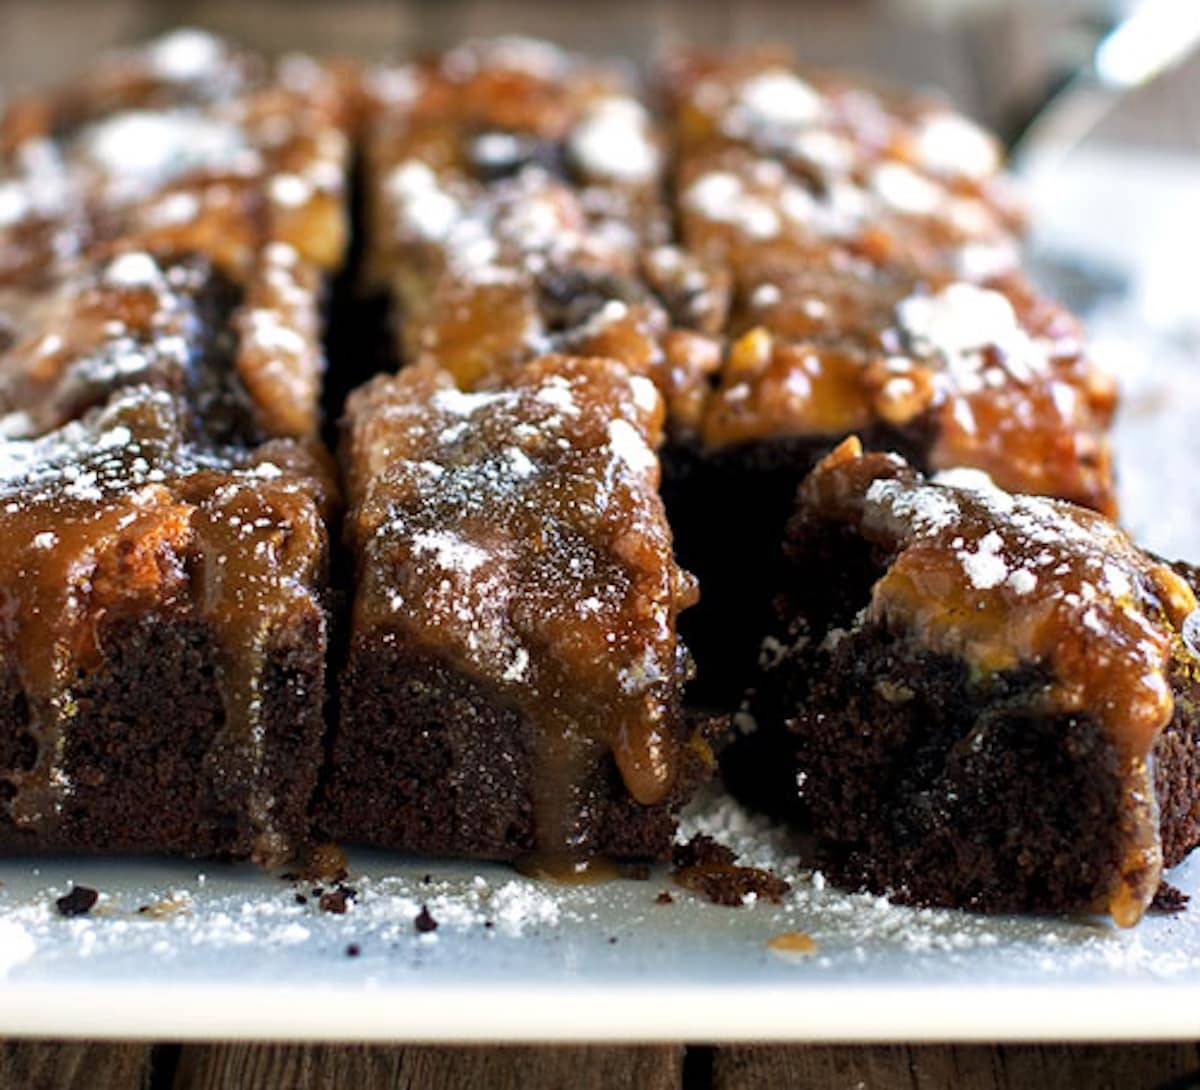 Chocolate peanut butter banana upside down cake cut into pieces.